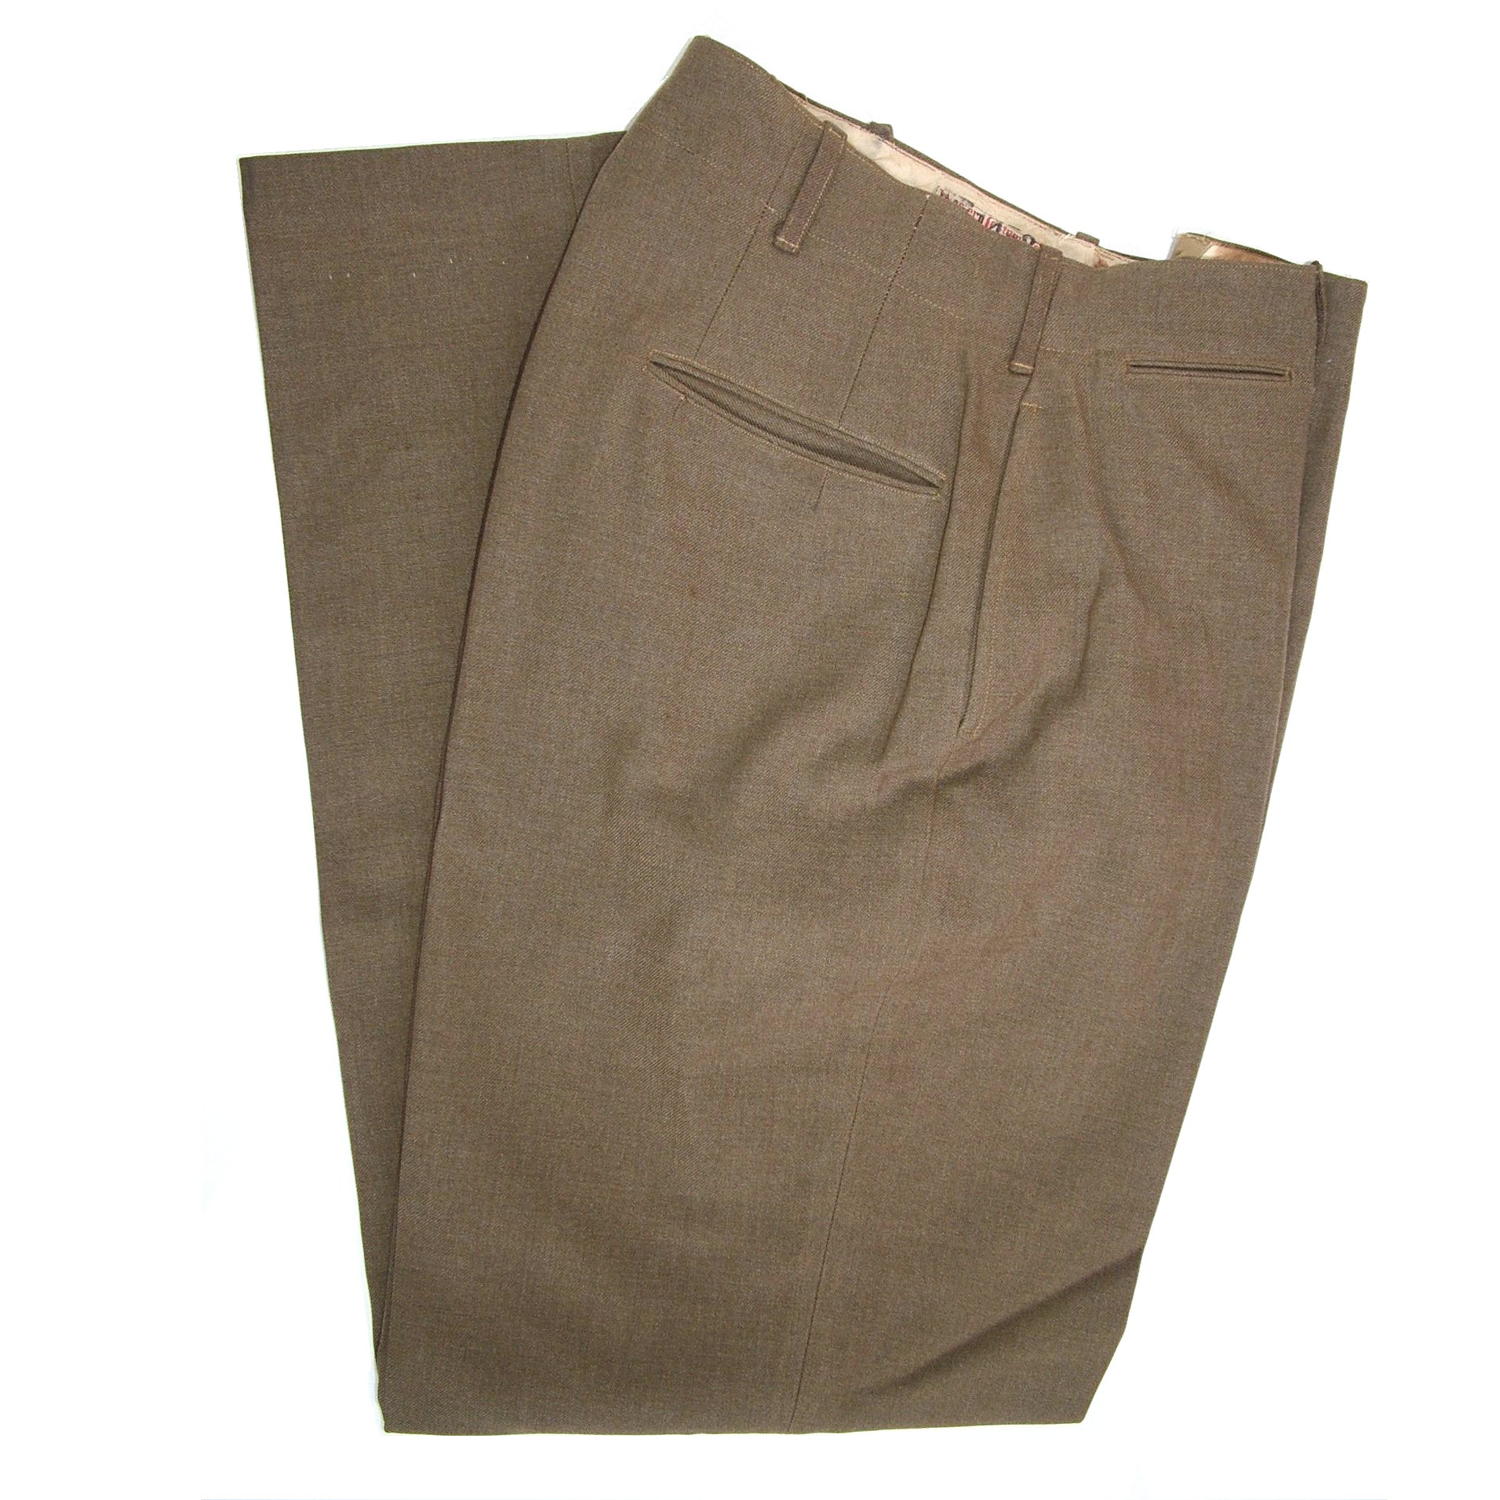 USAAF / US Army trousers